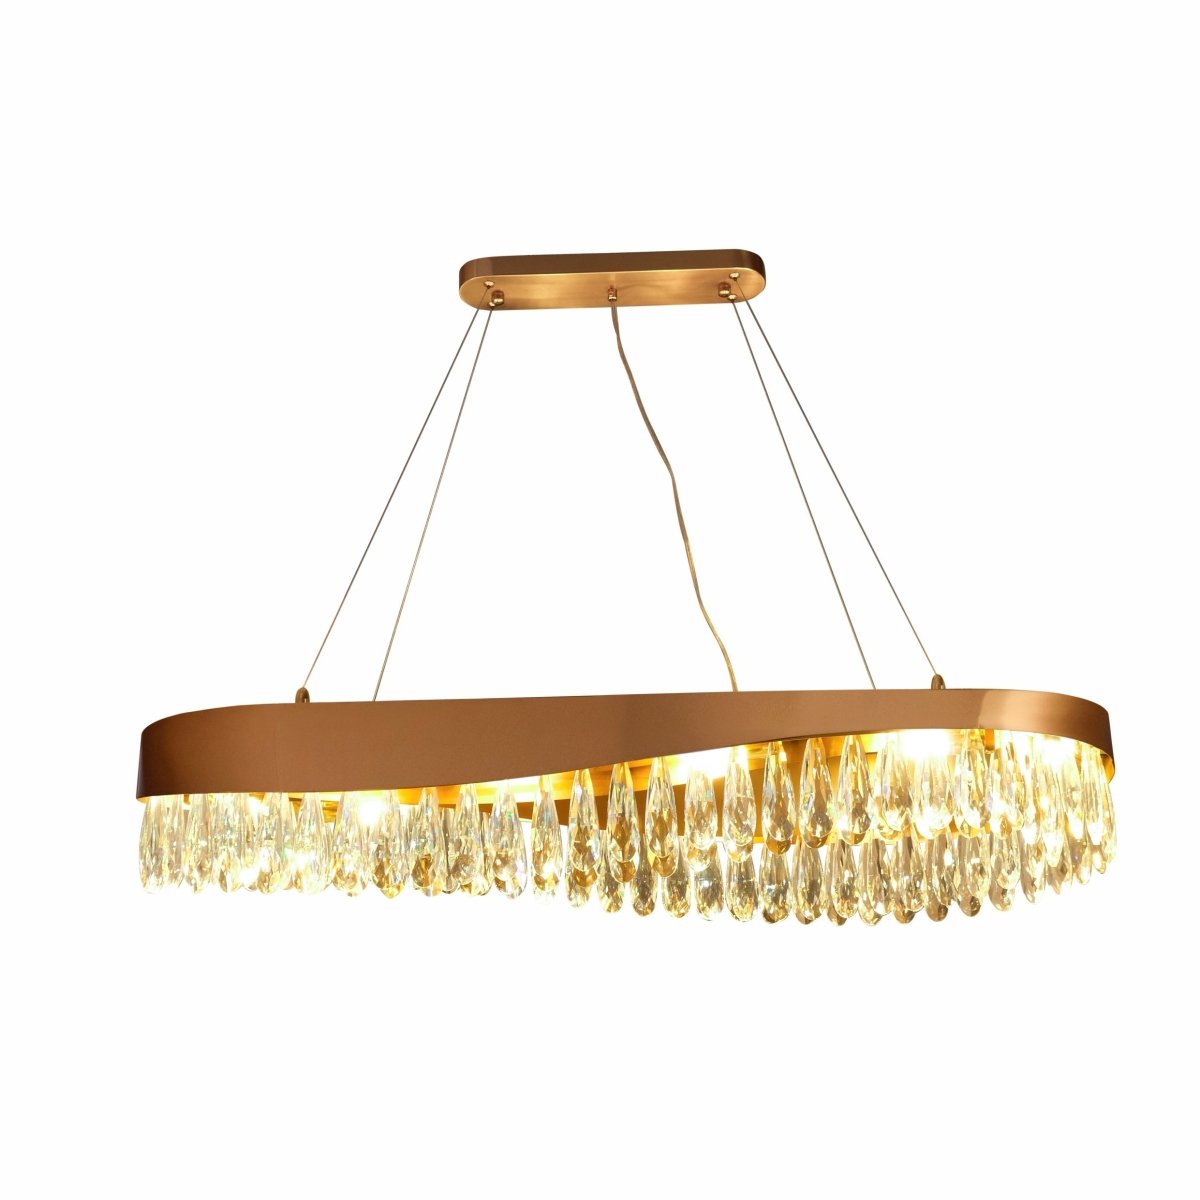 Main image of Faceted Long Pear Crystal Gold Metal Island Chandelier L1100 with 12xG9 Fitting | TEKLED 156-19574